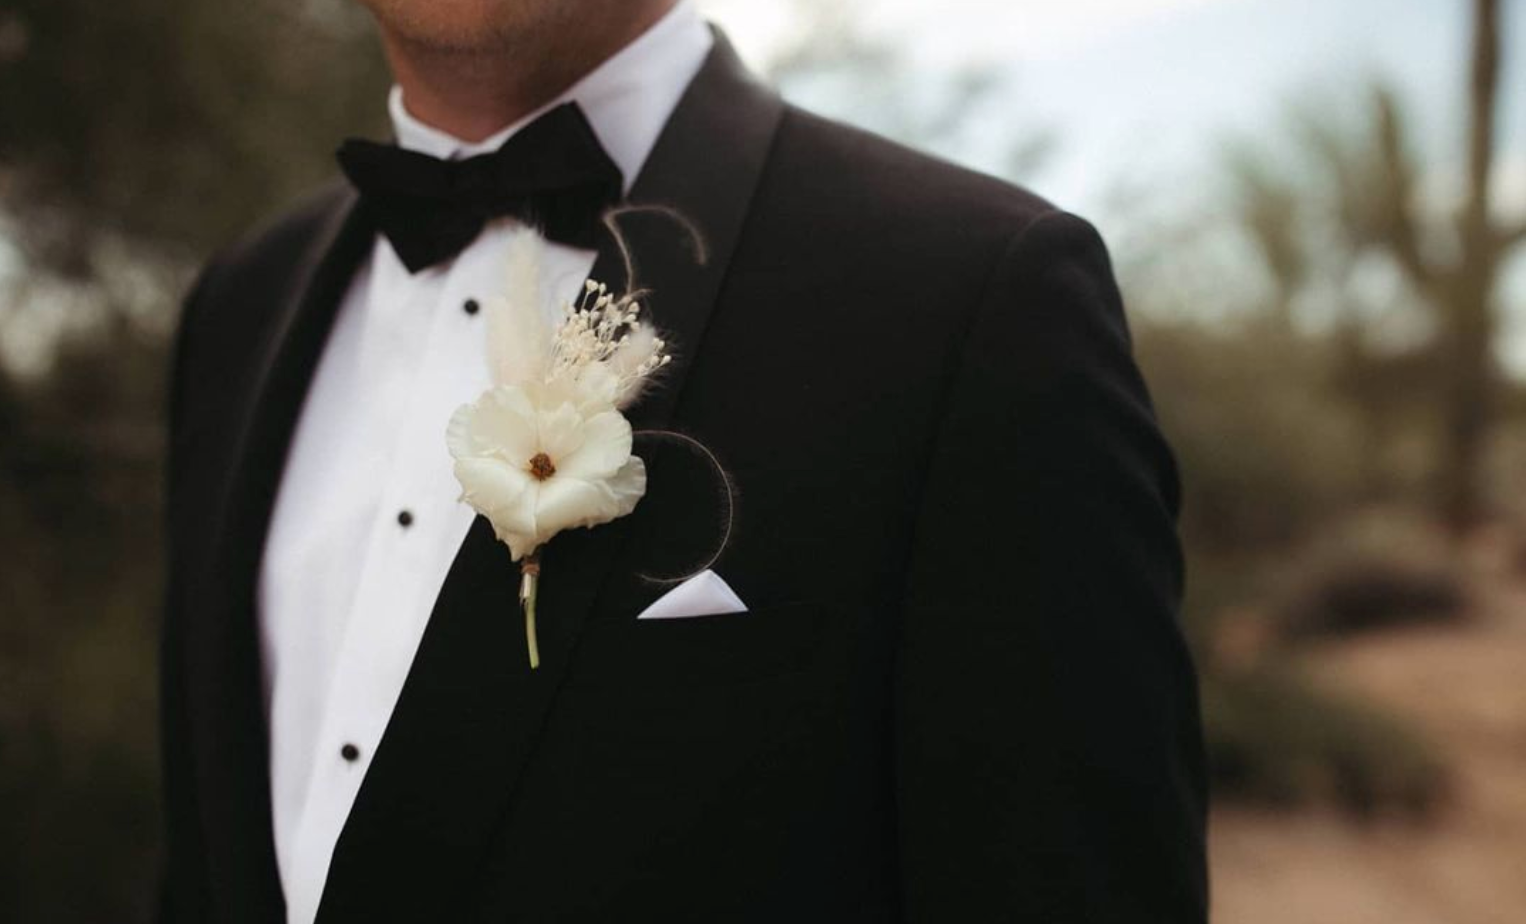 Groom wearing a tuxedo with a boutonniere in a desert wedding setting